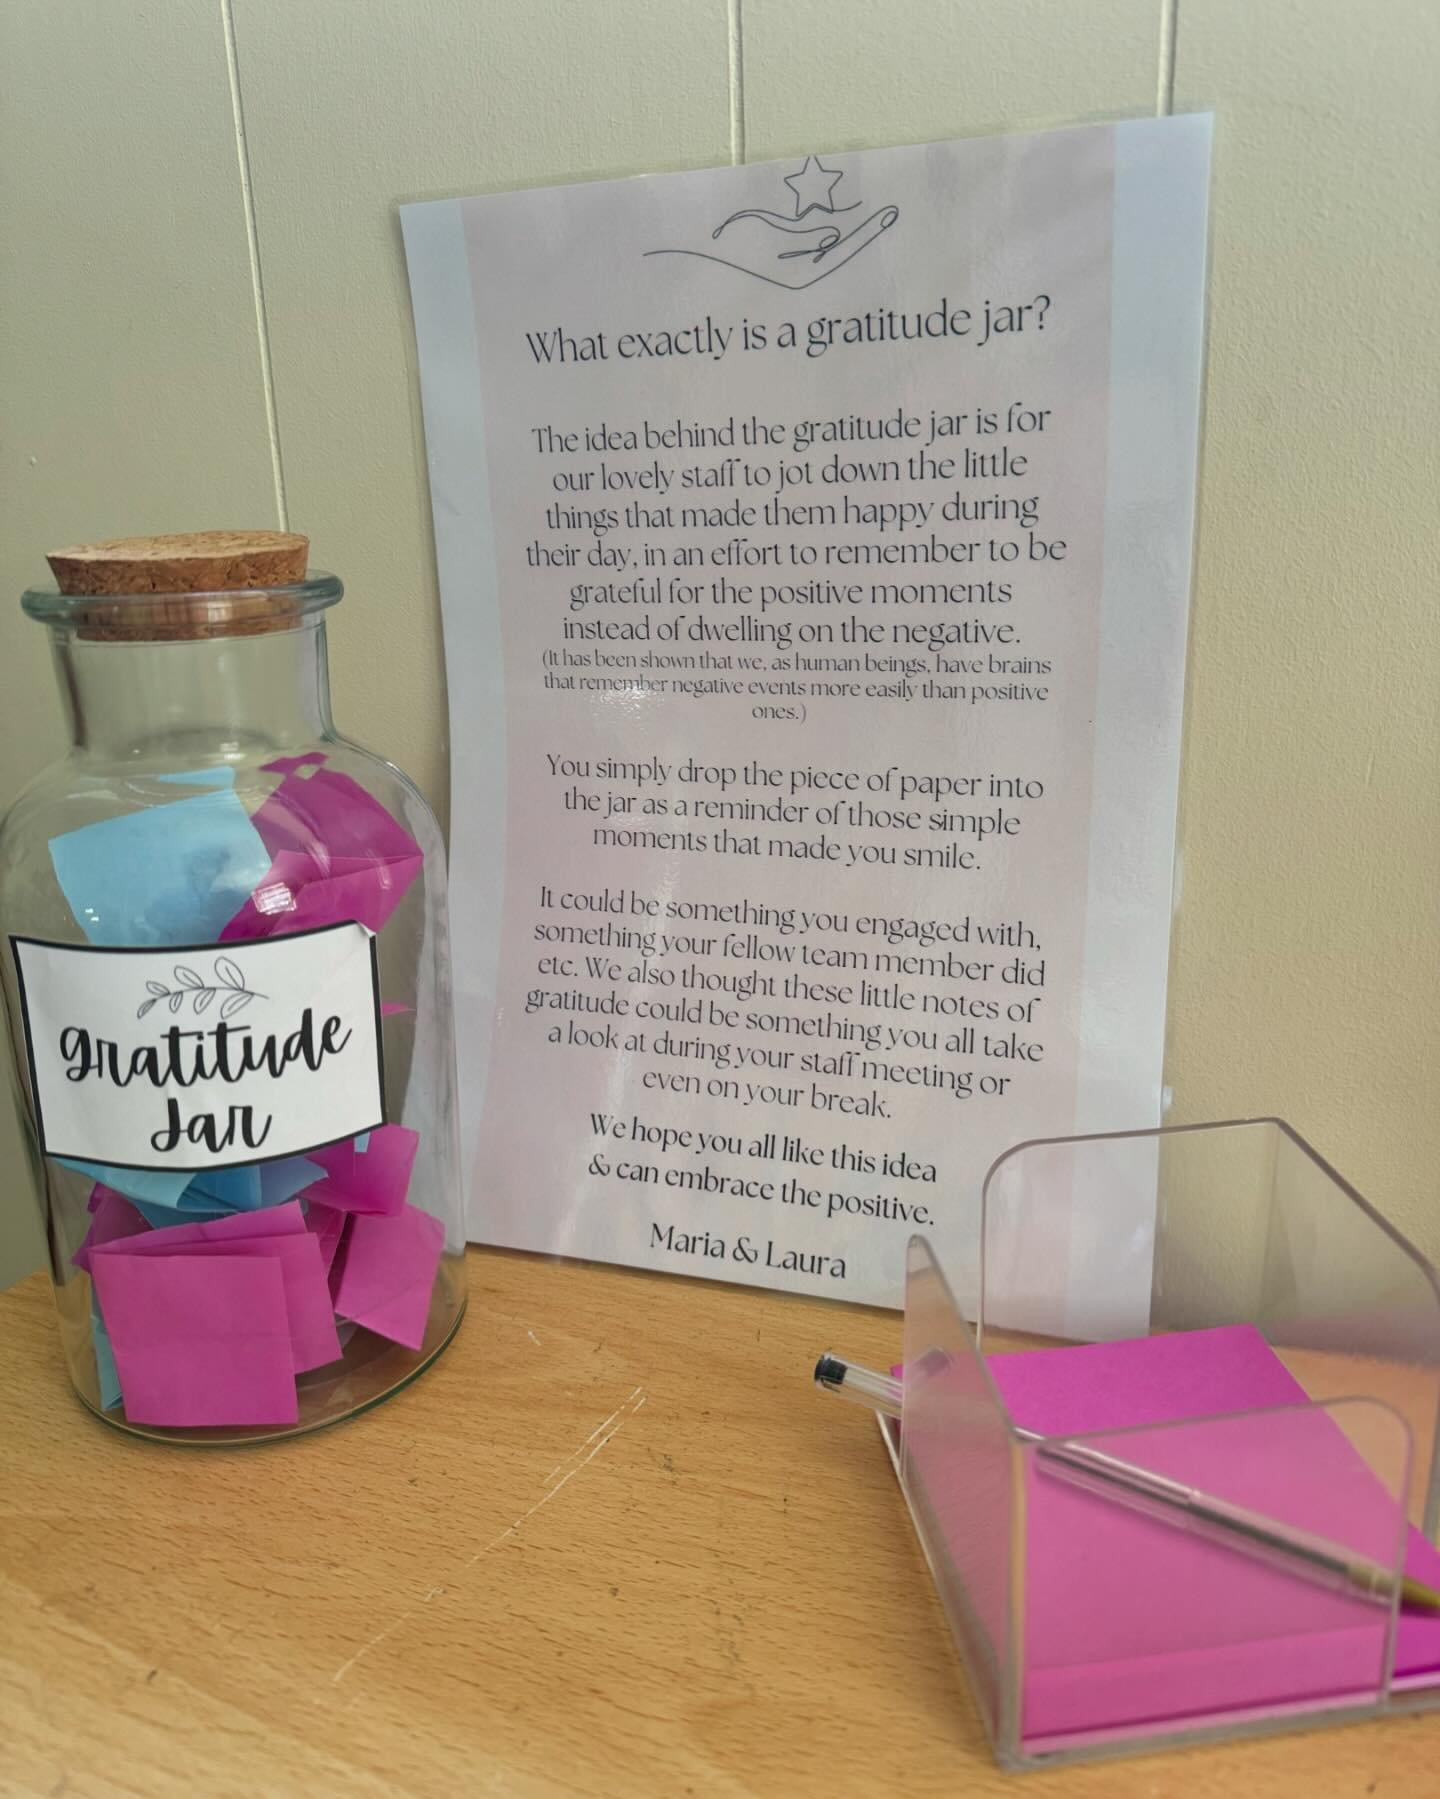 💫 Seeing our staff gratitude jar filling up&hellip;.such a lovely feeling.
..
..
What exactly is a gratitude jar?
..
..
The idea behind the gratitude jar is for our lovely staff to jot down the little things that made them happy during their day, in